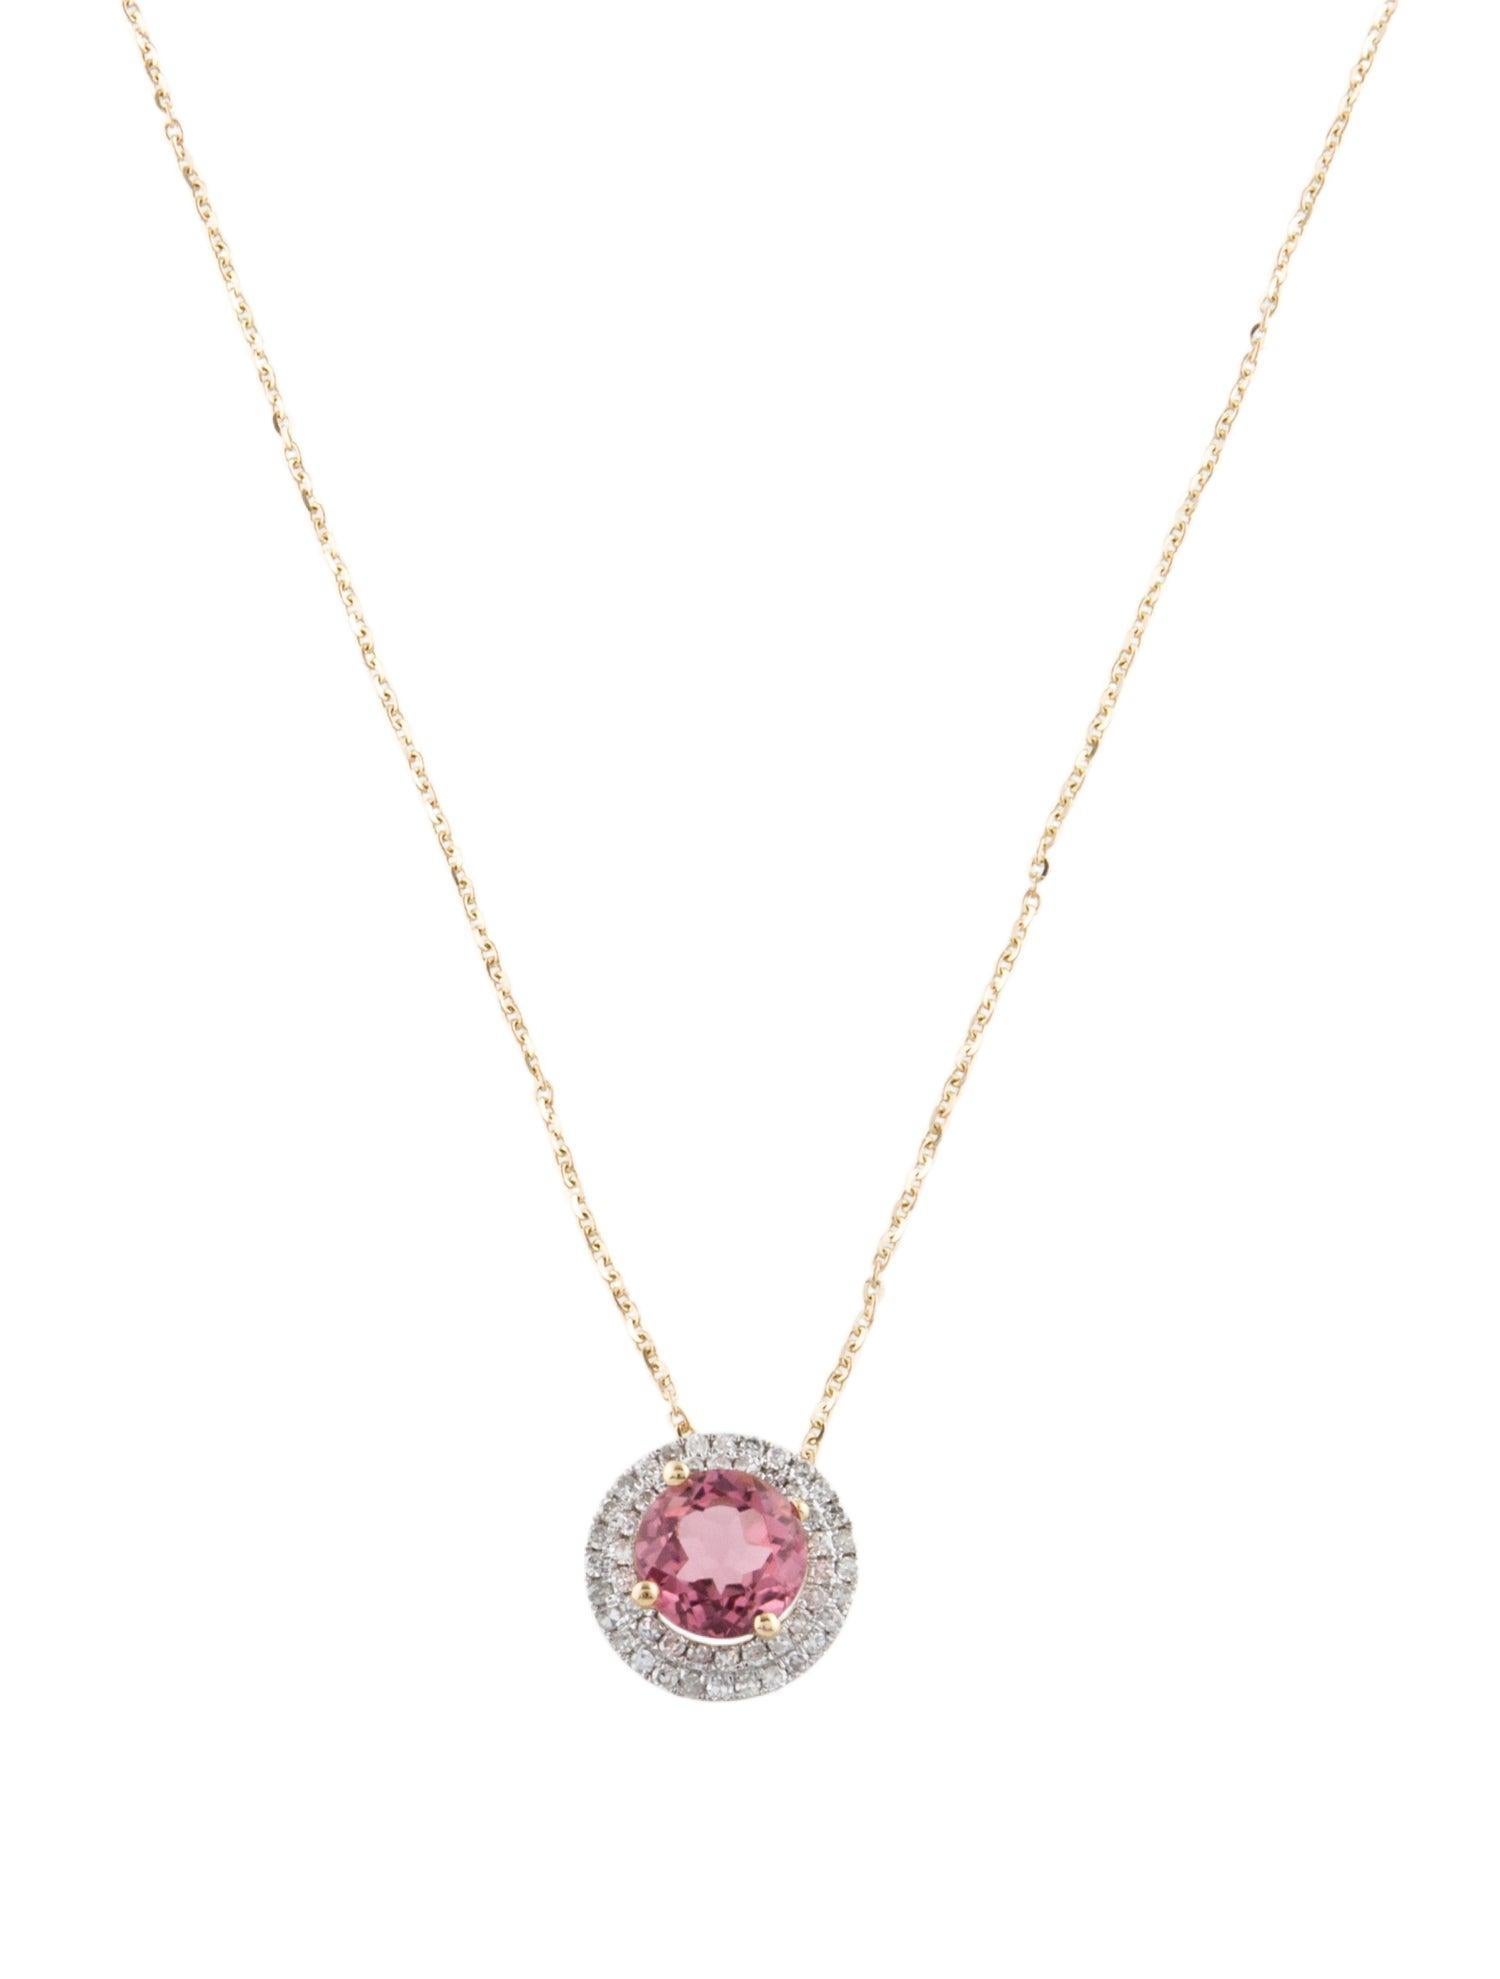 Step into a world of mesmerizing colors and natural beauty with our Rainbow Gemstone Radiance Collection. This Pink Tourmaline and Diamond Pendant, a stunning creation from Jeweltique, invites you to explore the kaleidoscope of hues found in the